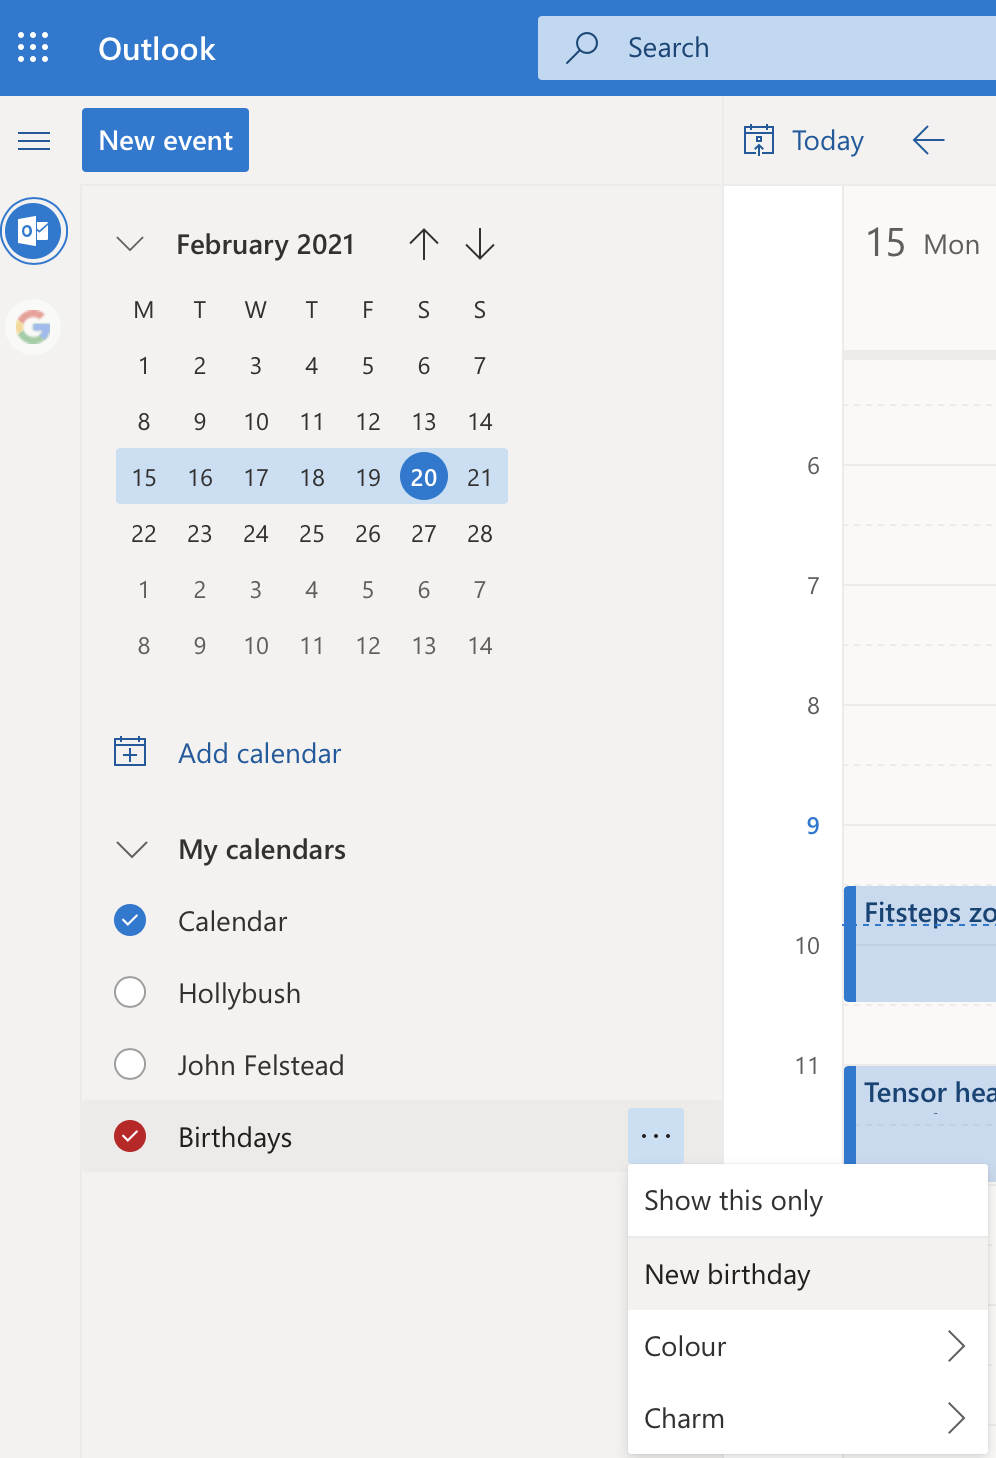 Birthdays information in Contacts not showing in Calendar